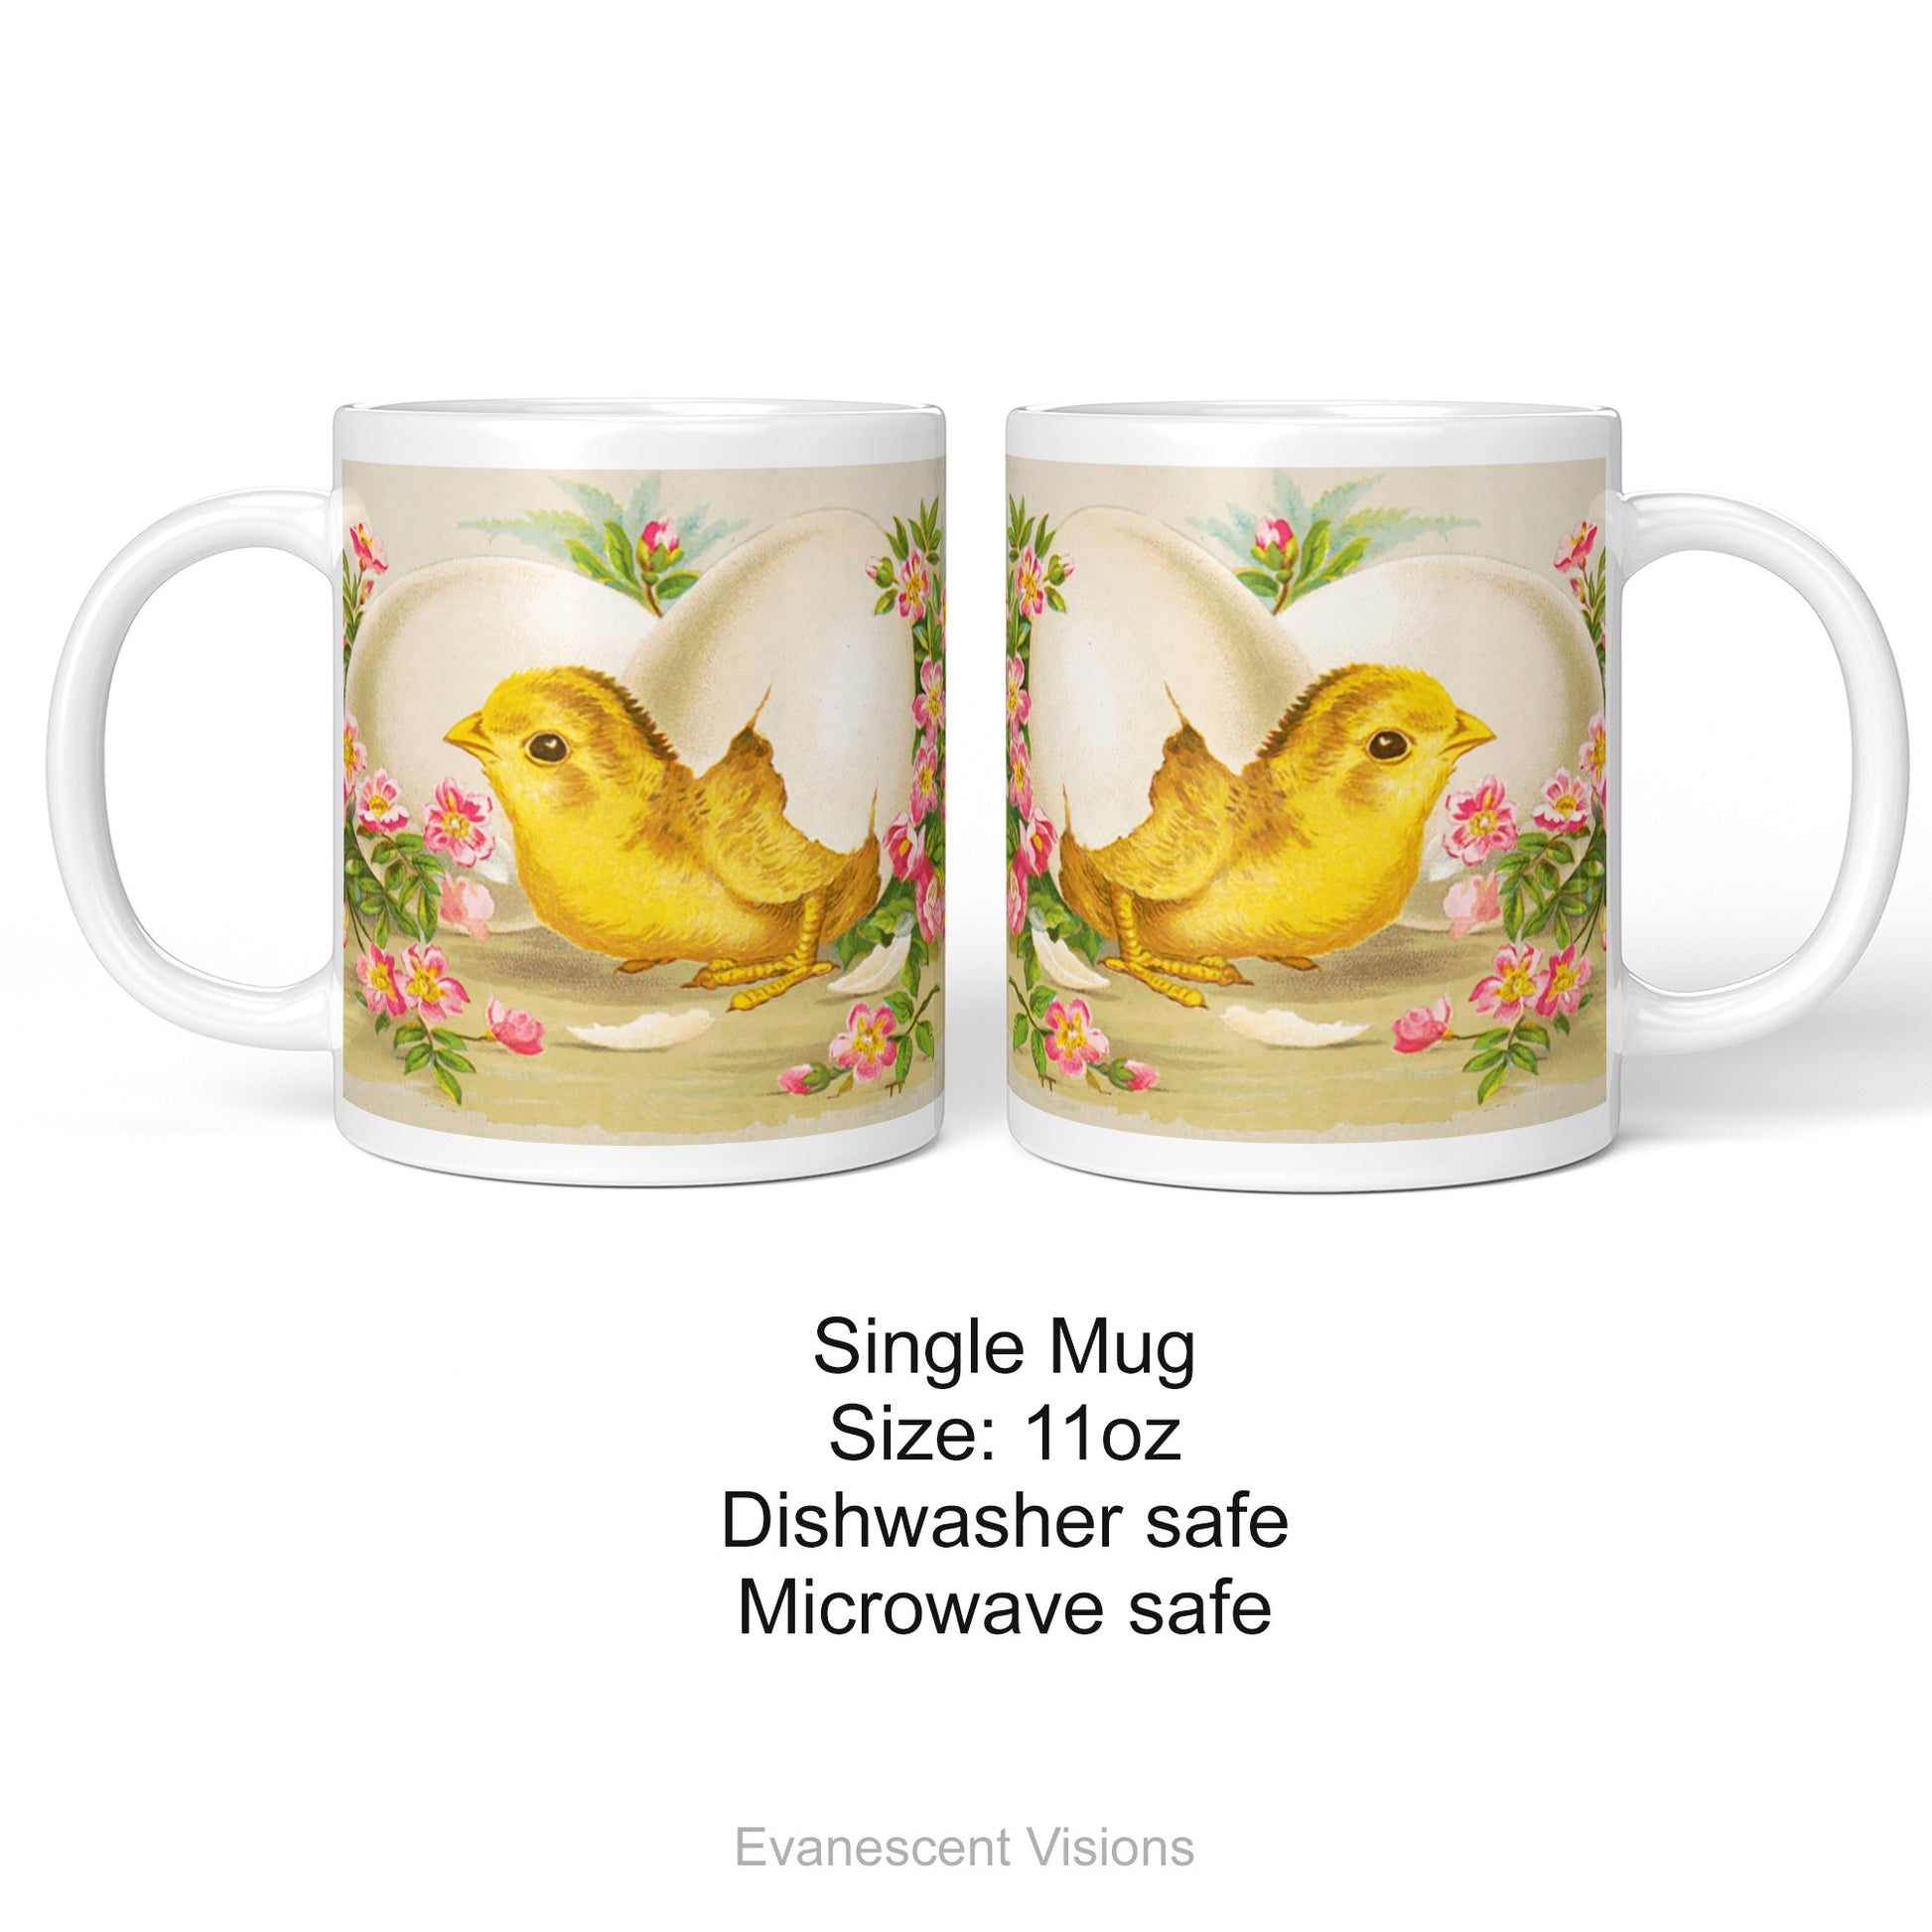 Both sides of mug shown with design of Easter Chick breaking out of an egg surrounded by pink flowers. Underneath are product details.